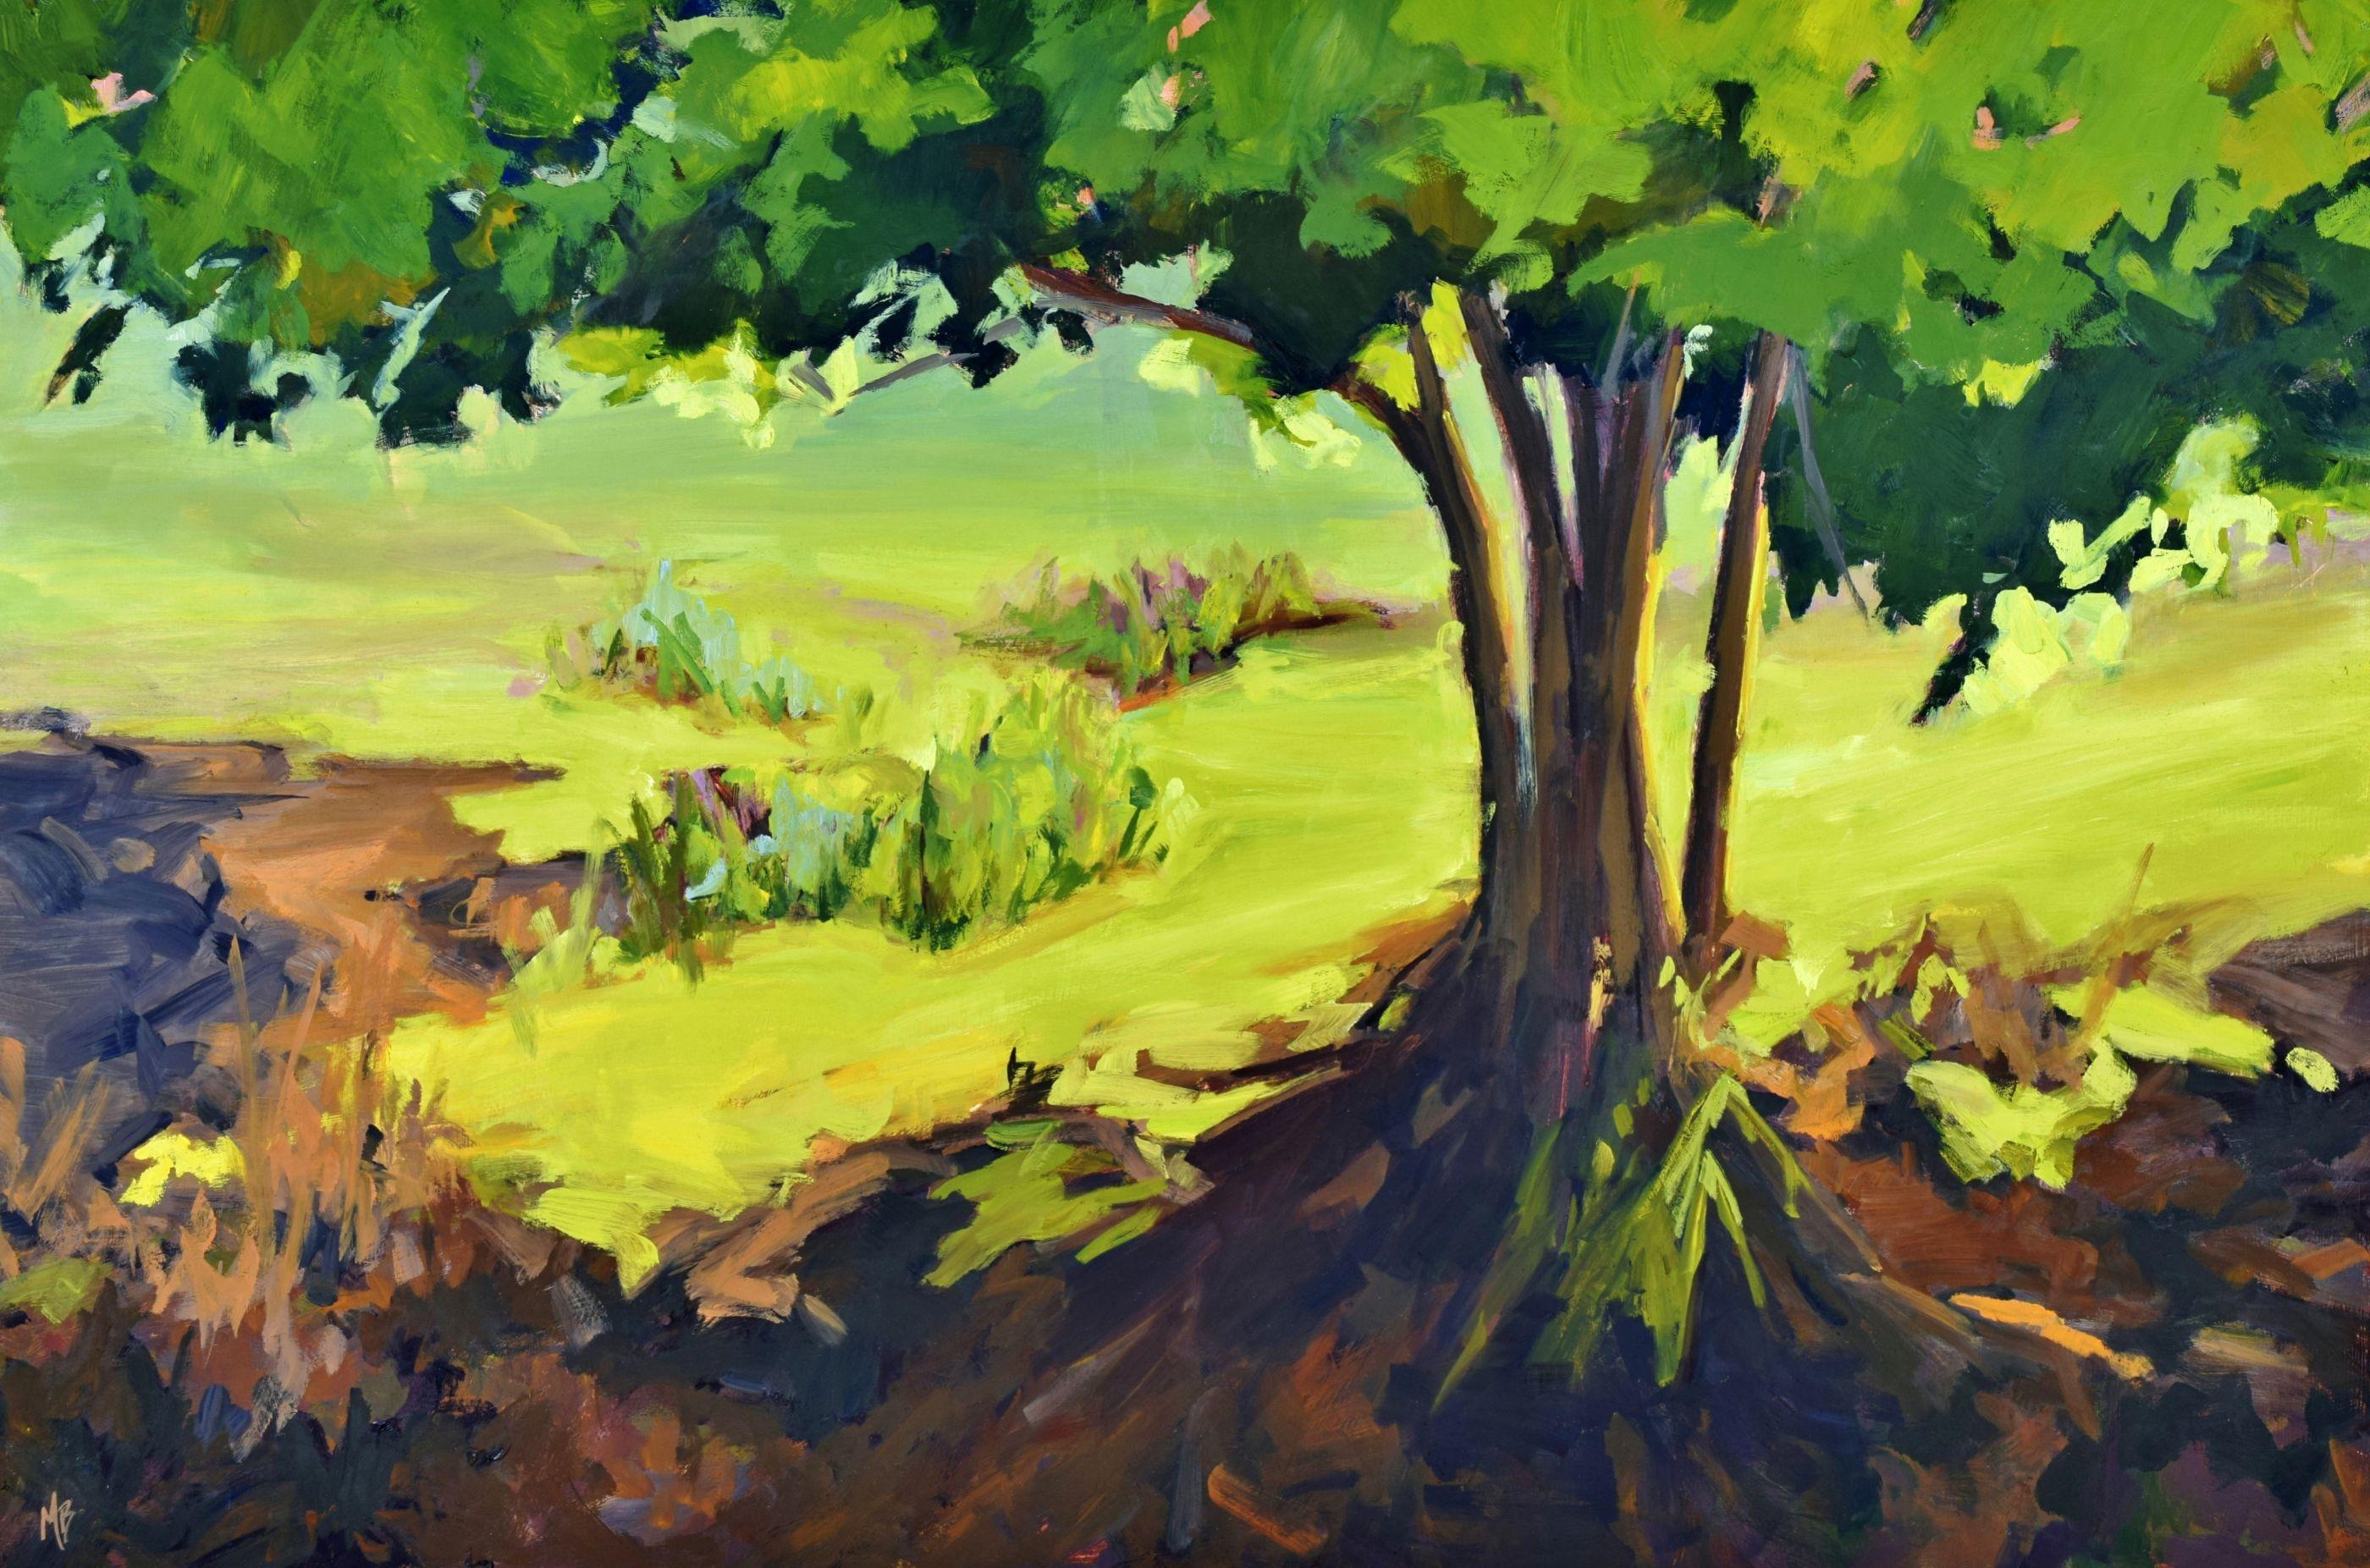 On a hot summer day, I look for the shade of a tree to rest my eyes and my spirit. This tree had gnarly twigs and roots sticking above the ground which proved to me it has weathered many hot days and still stands strong.    :: Painting ::